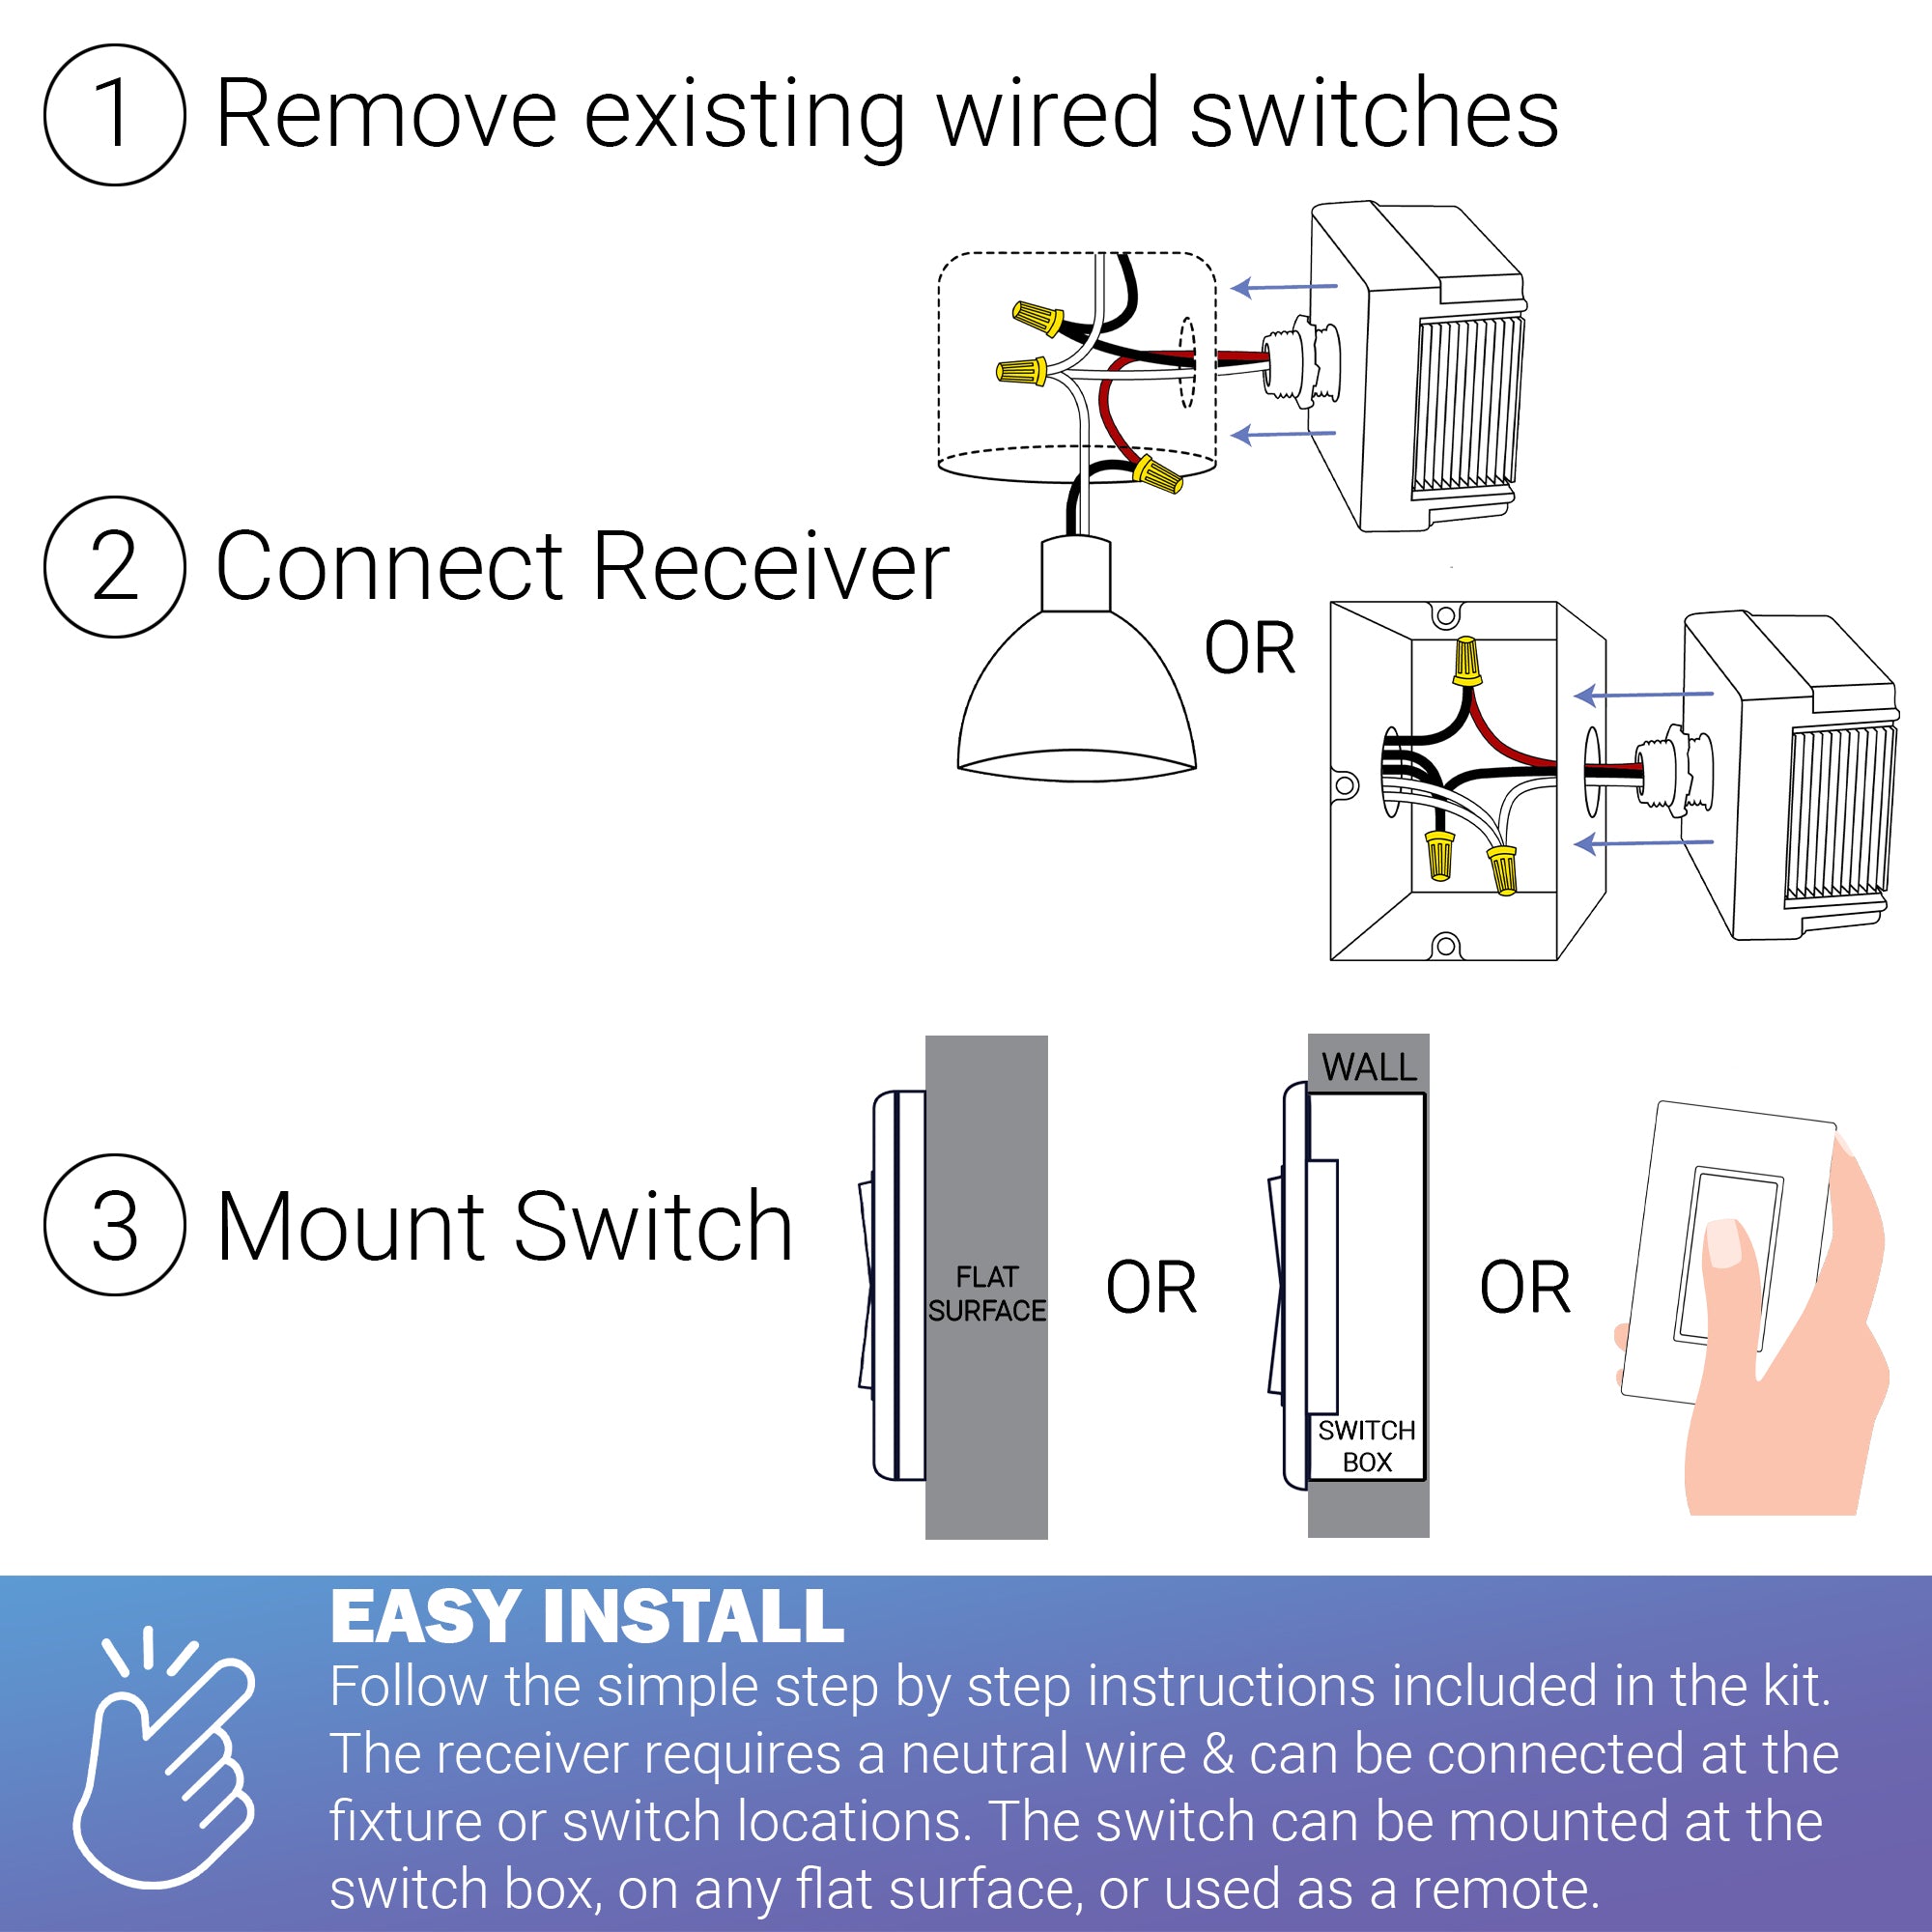 BASIC DIMMER KIT: 1 DIMMING RECEIVER, 1 SWITCH